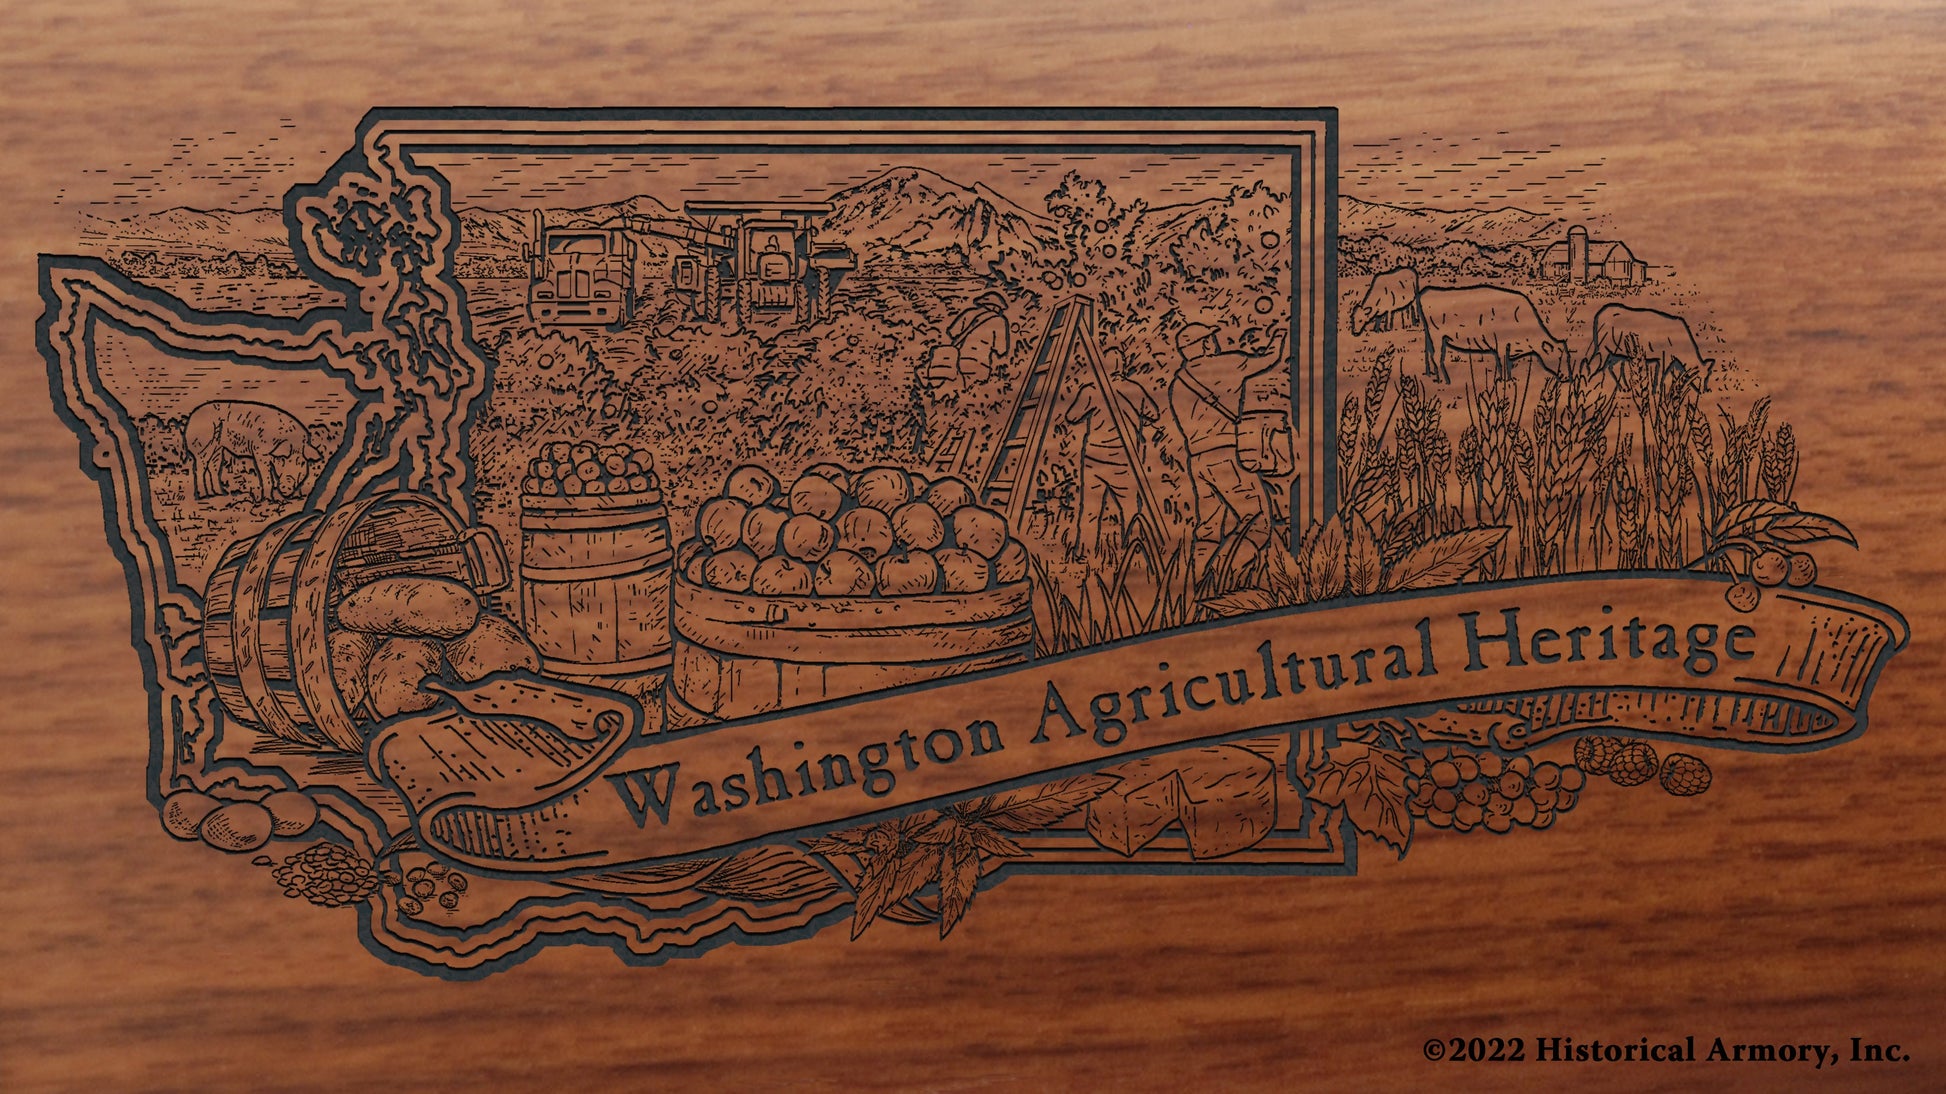 Washington Agricultural Heritage Engraved Rifle Buttstock